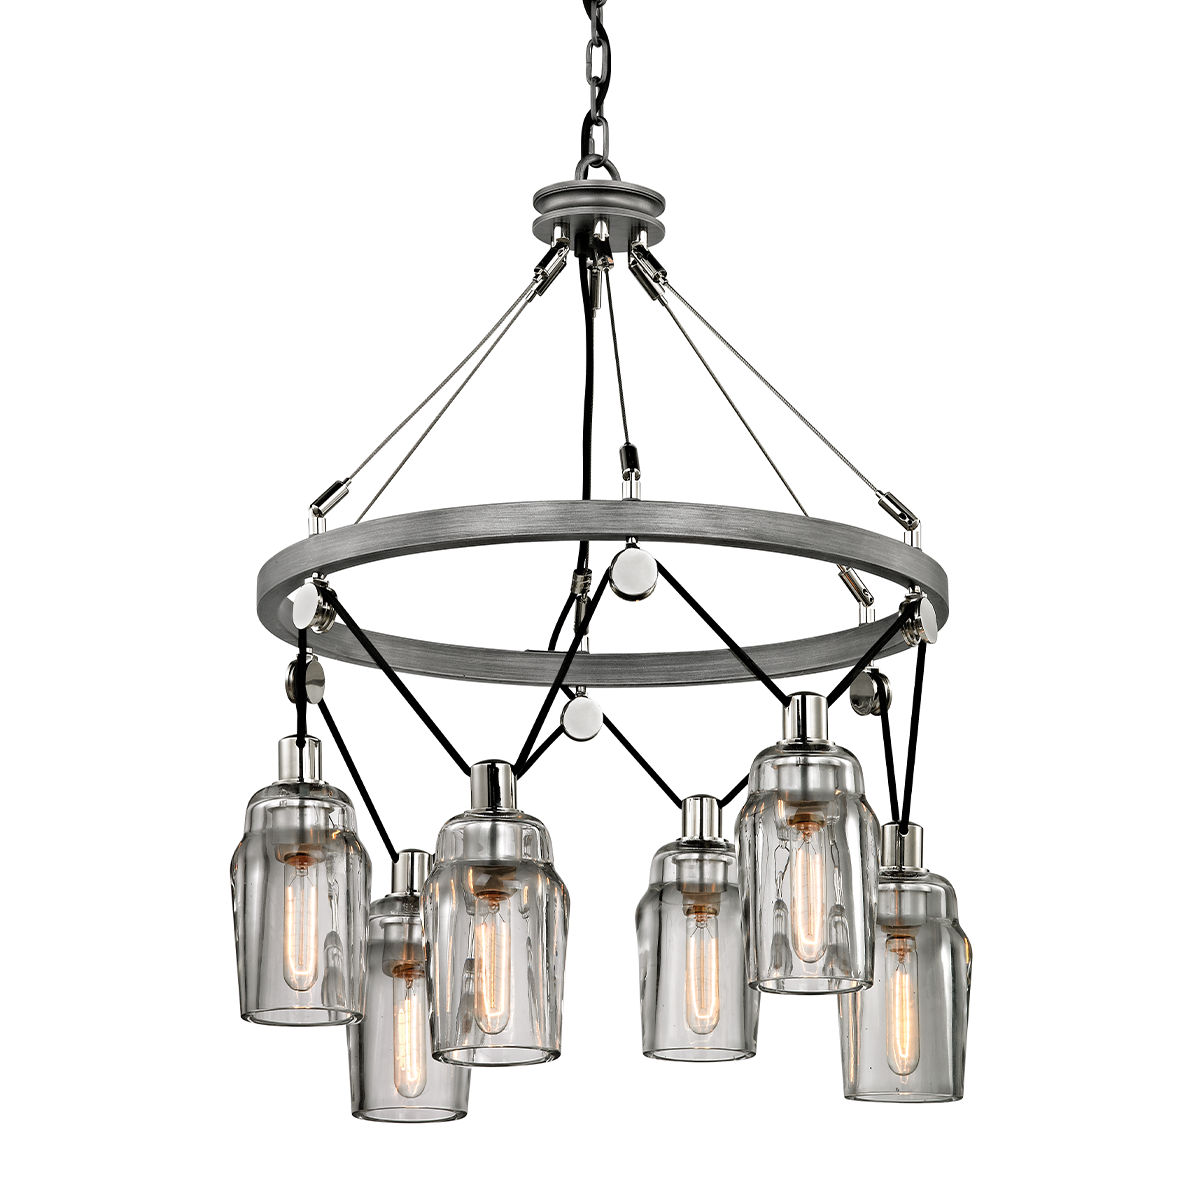 Citizen Chandelier GRAPHITE AND POLISHED NICKEL